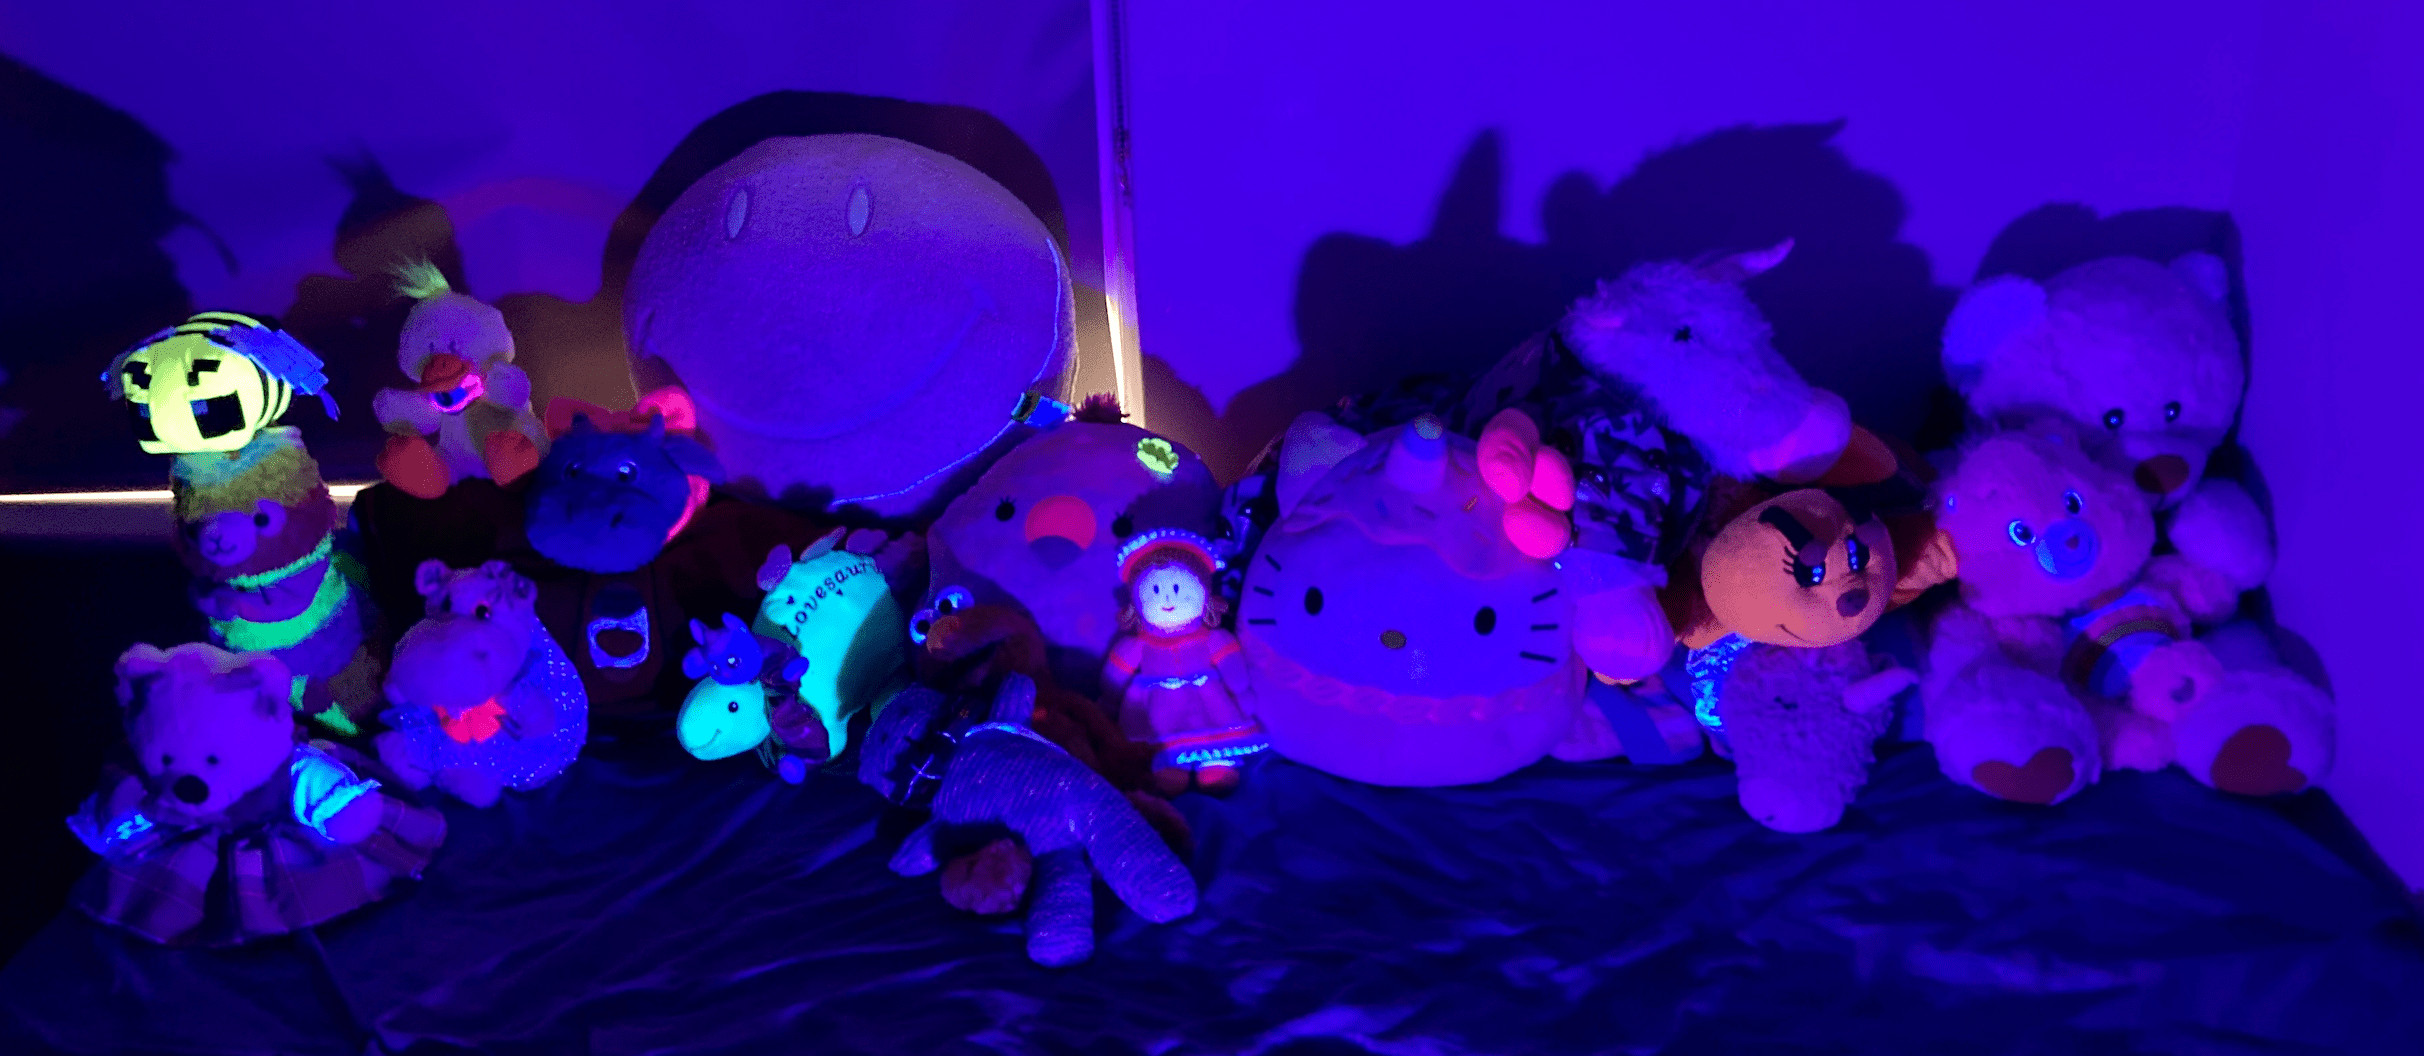 All of SlinkyFam's plushies laid out on bed in darkness UV